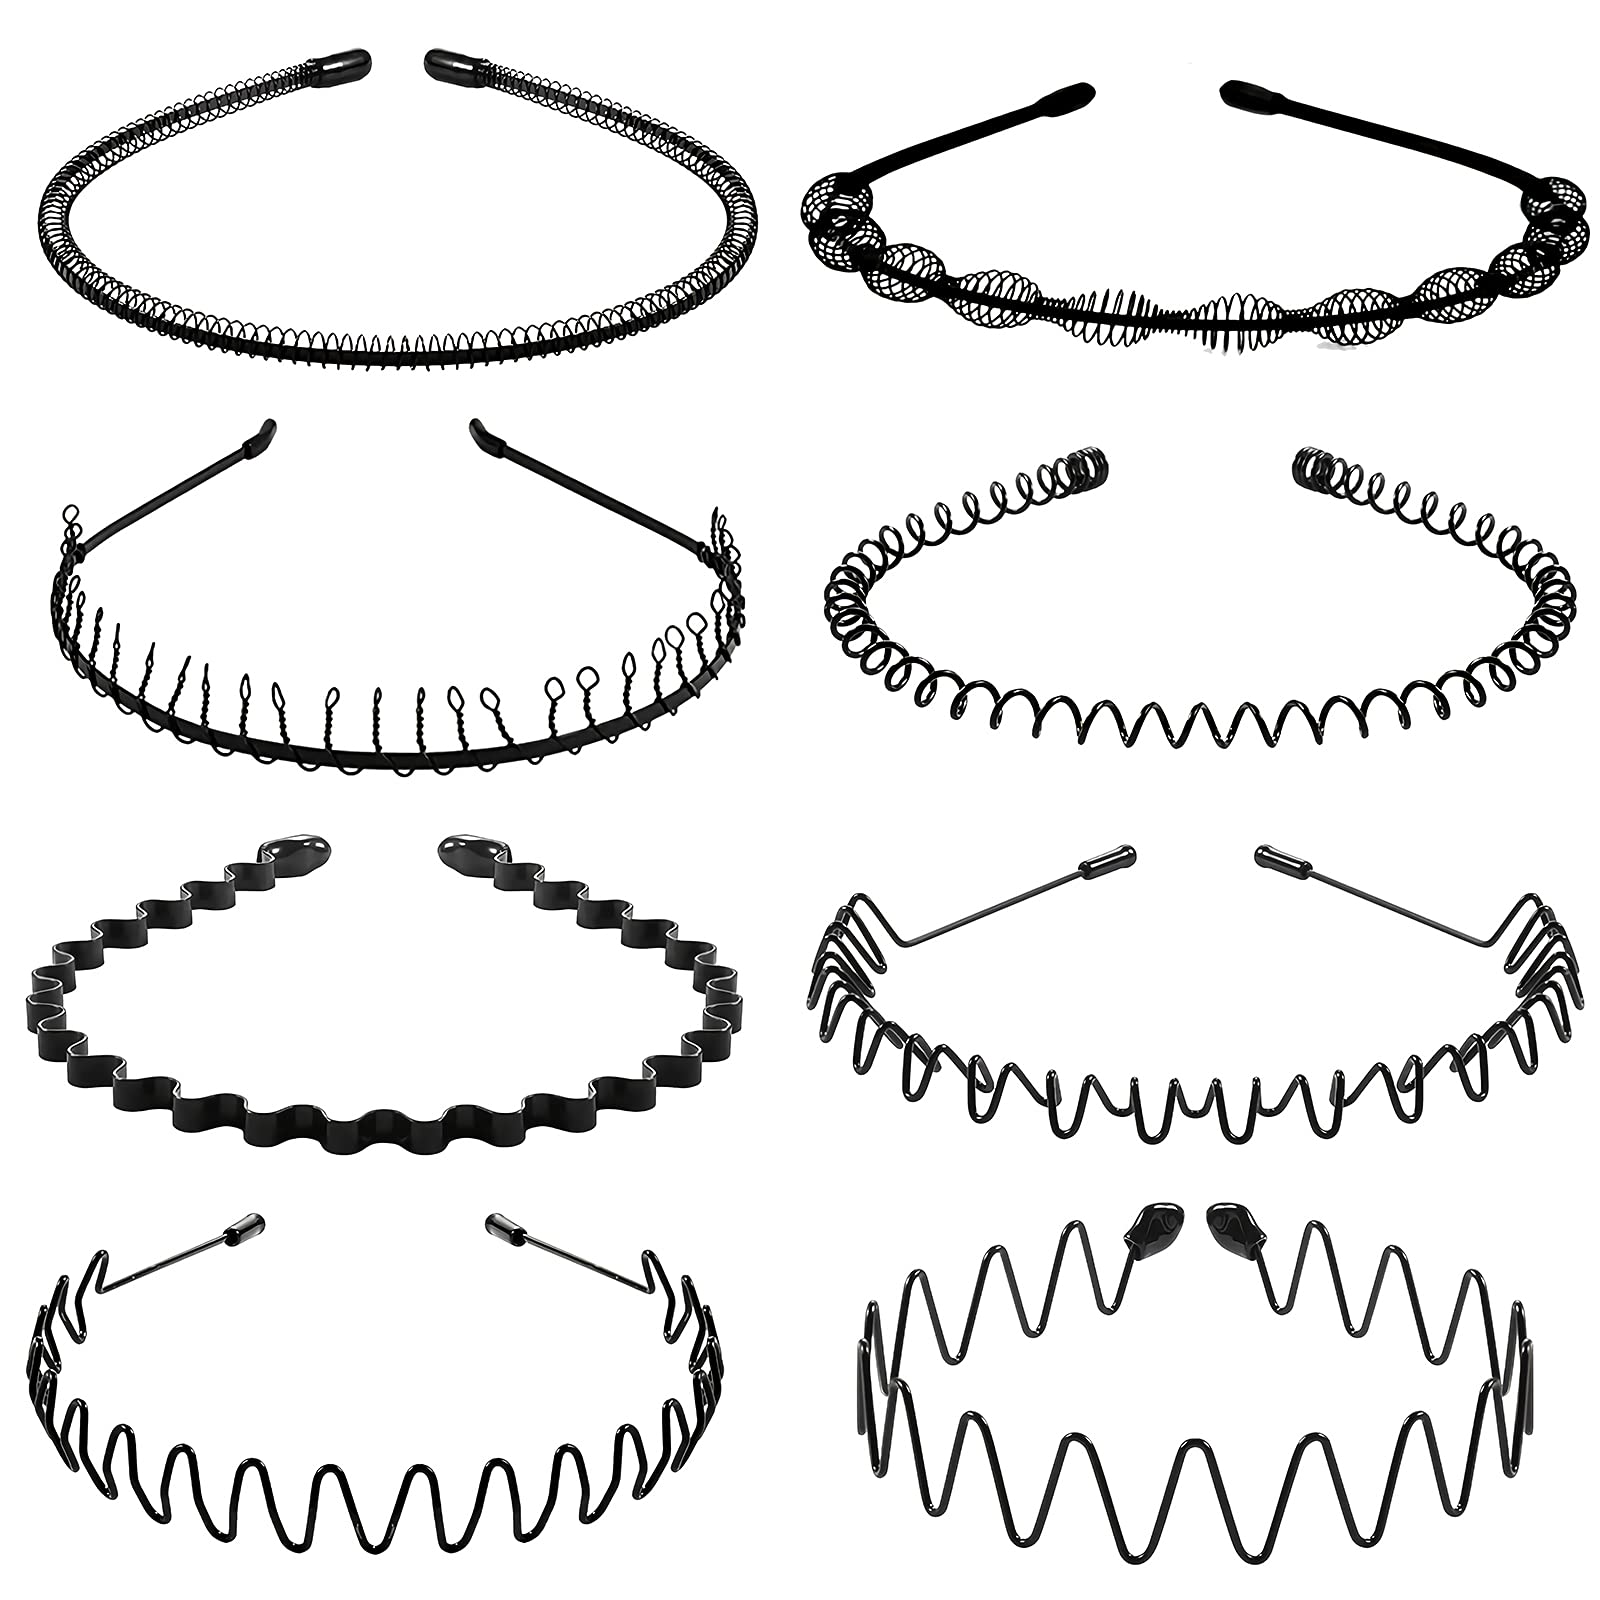 XINGZHE Metal Headbands for Men Women Hair Bands  Black Fashion Hairband  for Mens Sports Headband for Womens Hair Care Beauty Unisex Non Slip  Elastic Wavy Wide Hair Hoop Clips Accessories Outdoors 